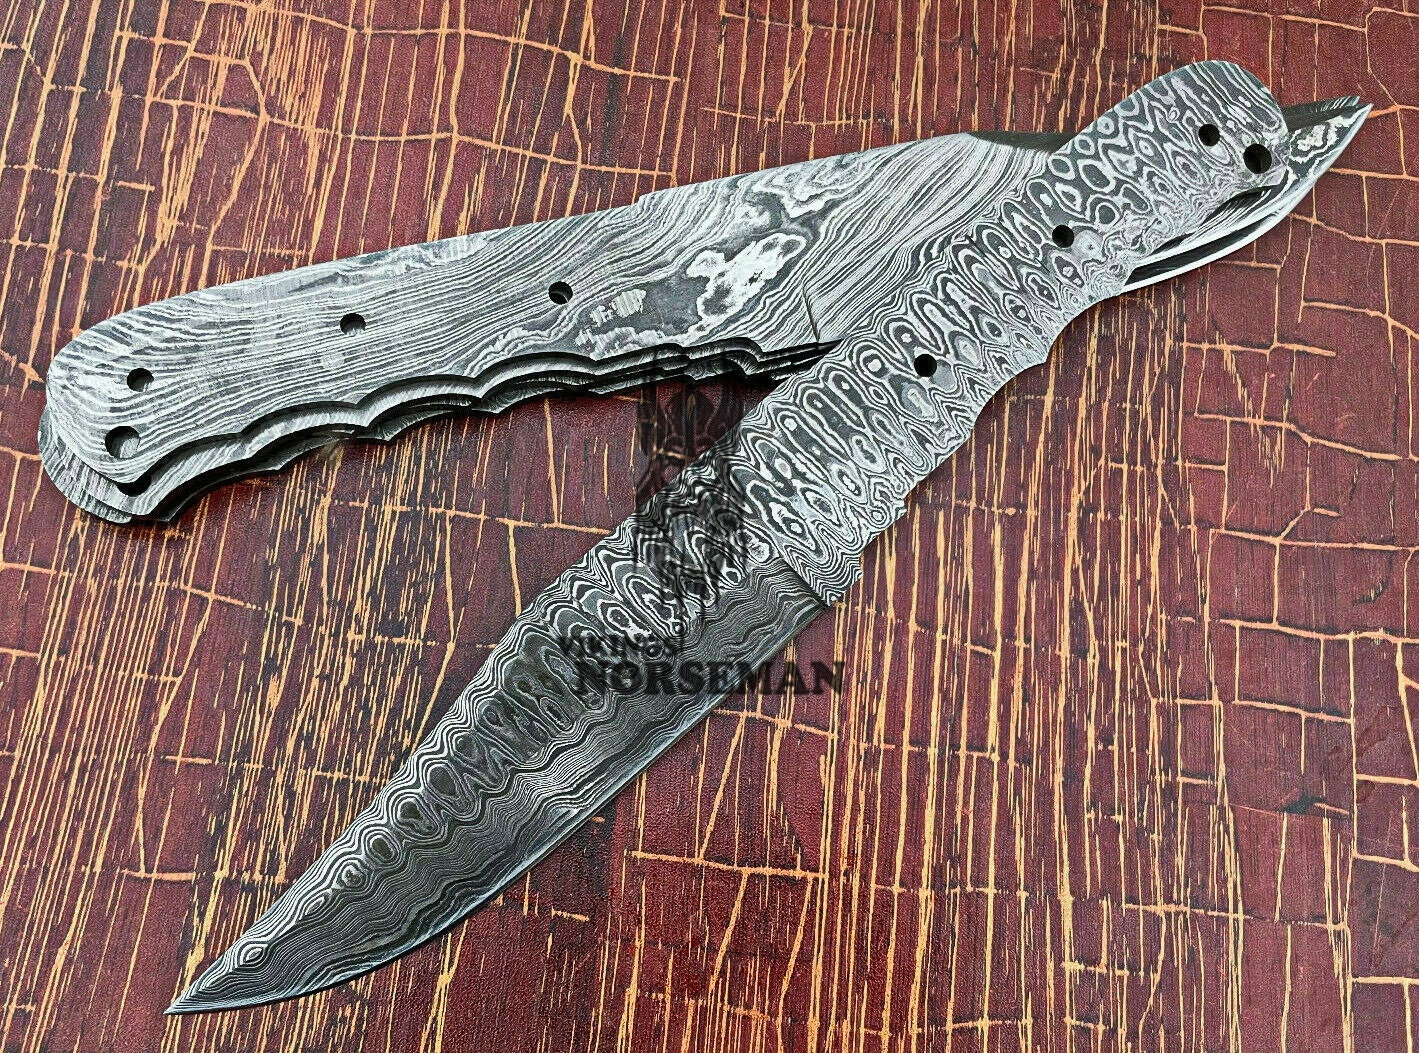 Lot of 5 Damascus Steel Blank Blade Knife for Knife Making Supplies, A  Supplies to Make Knives, Damascus Steel Blank Blades VBB-141 